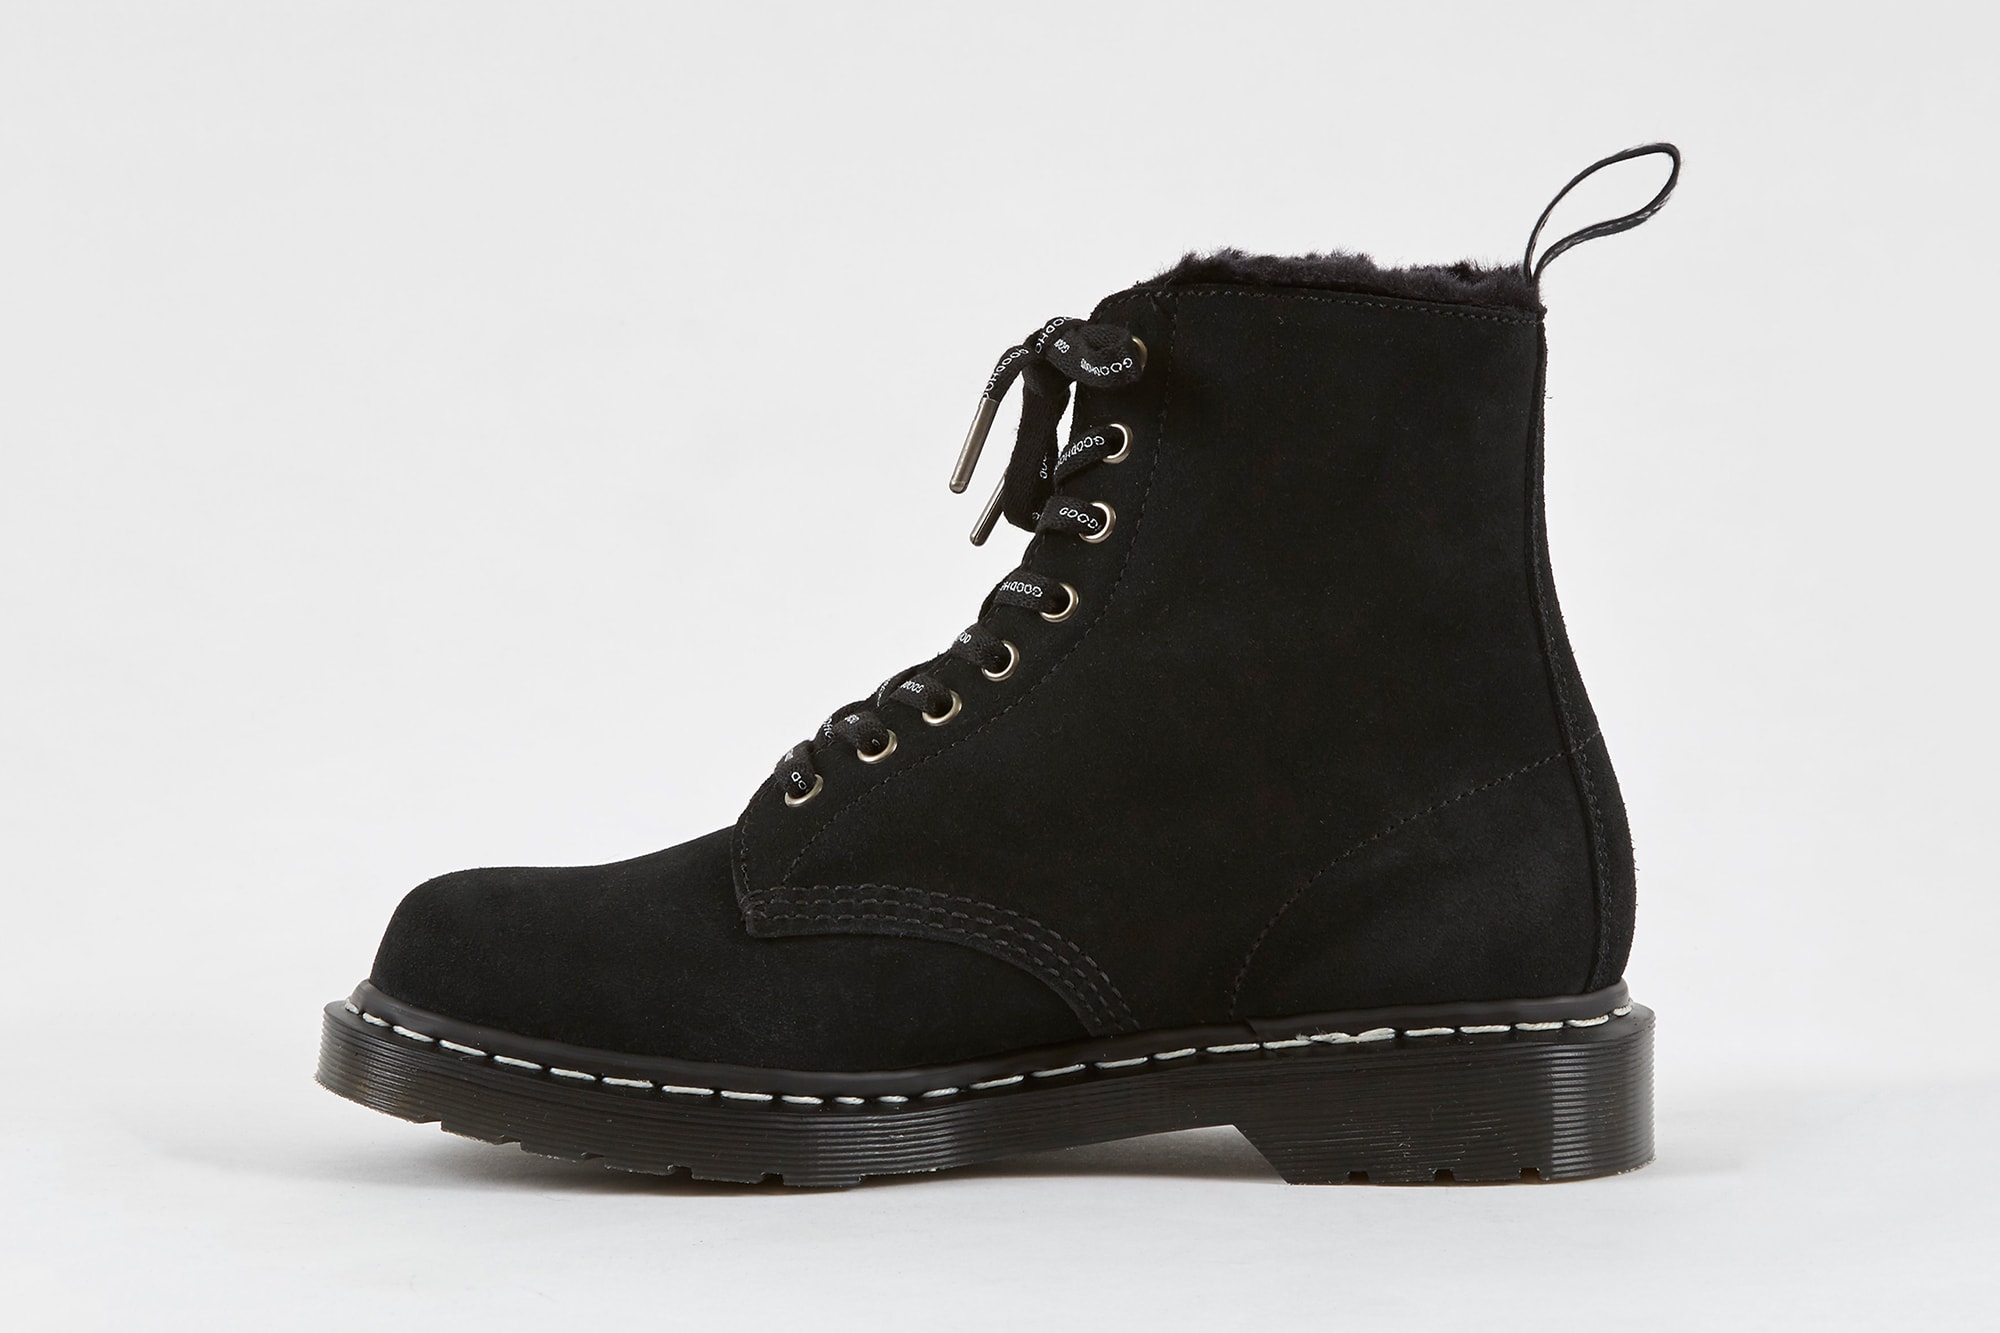 Goodhood Dr. Martens 8-Hole Boot Black Colorway Suede Outer Faux Fur Lined Shoe